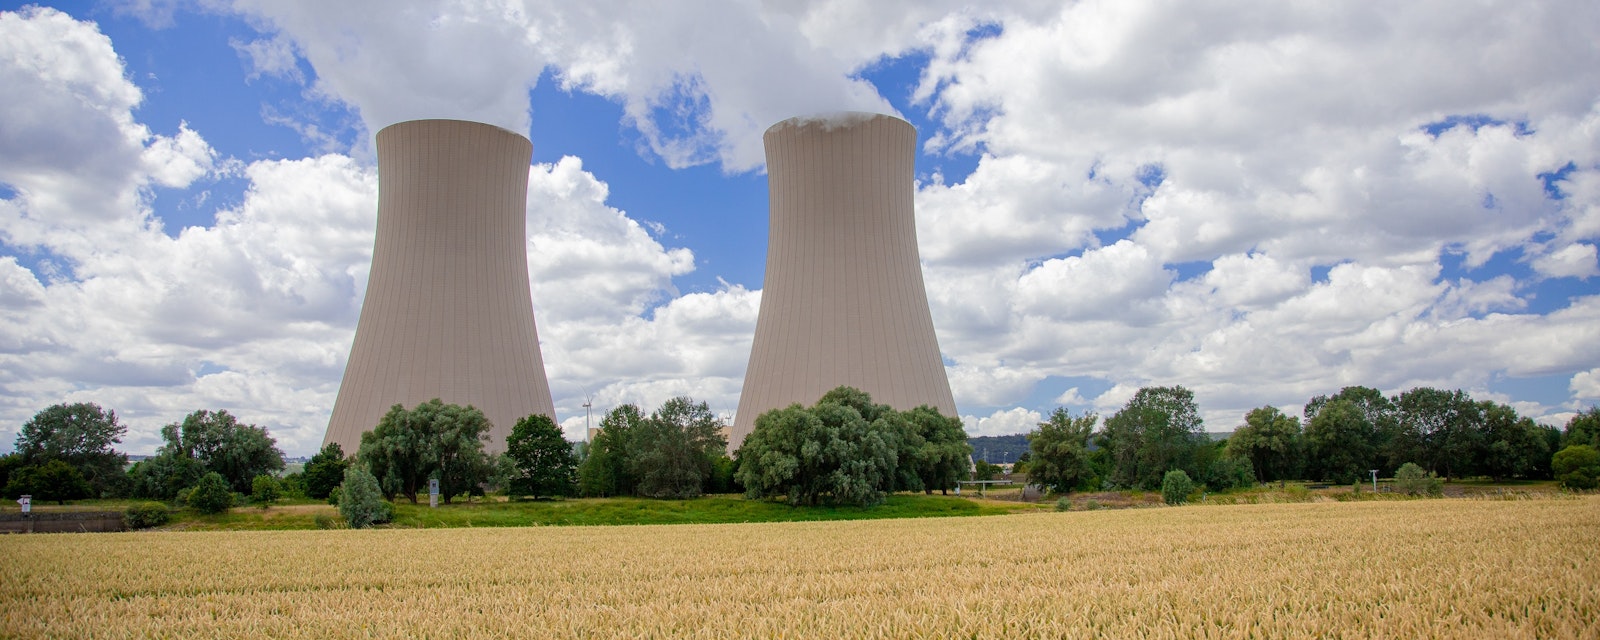 Corn,Field,In,Front,Of,Cooling,Towers,Of,A,Nuclear